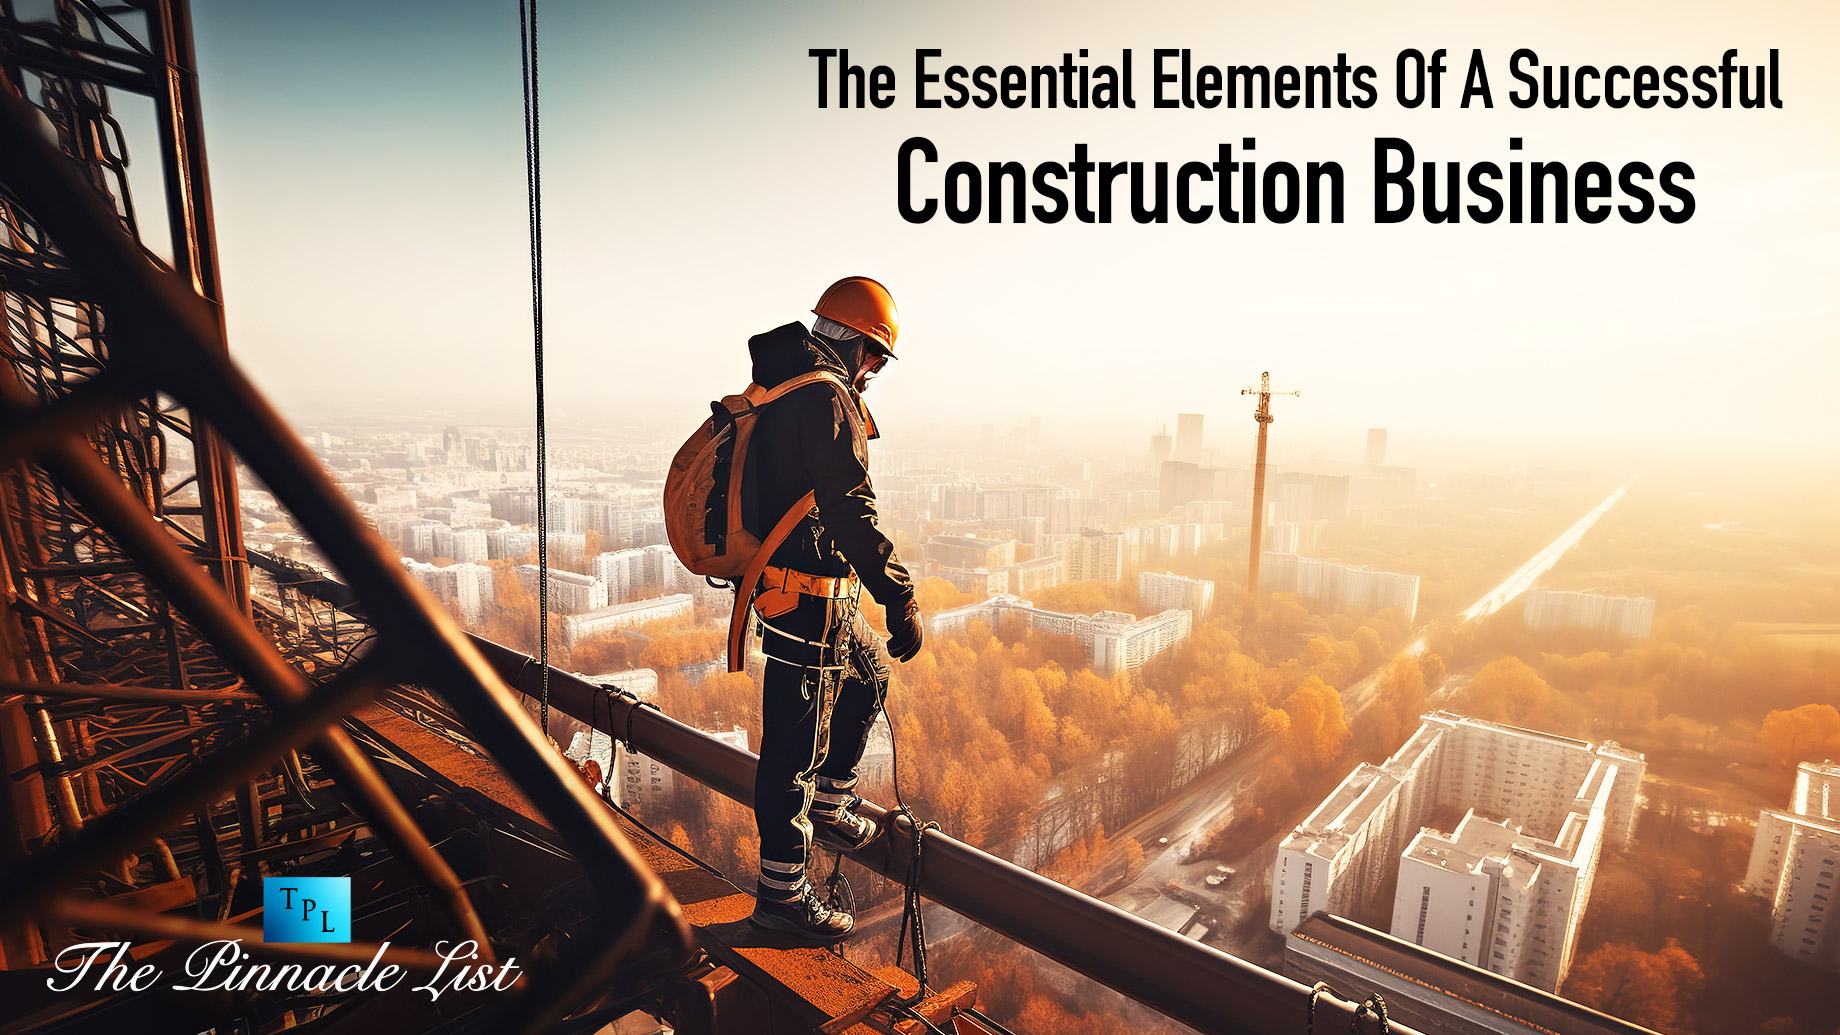 The Essential Elements Of A Successful Construction Business